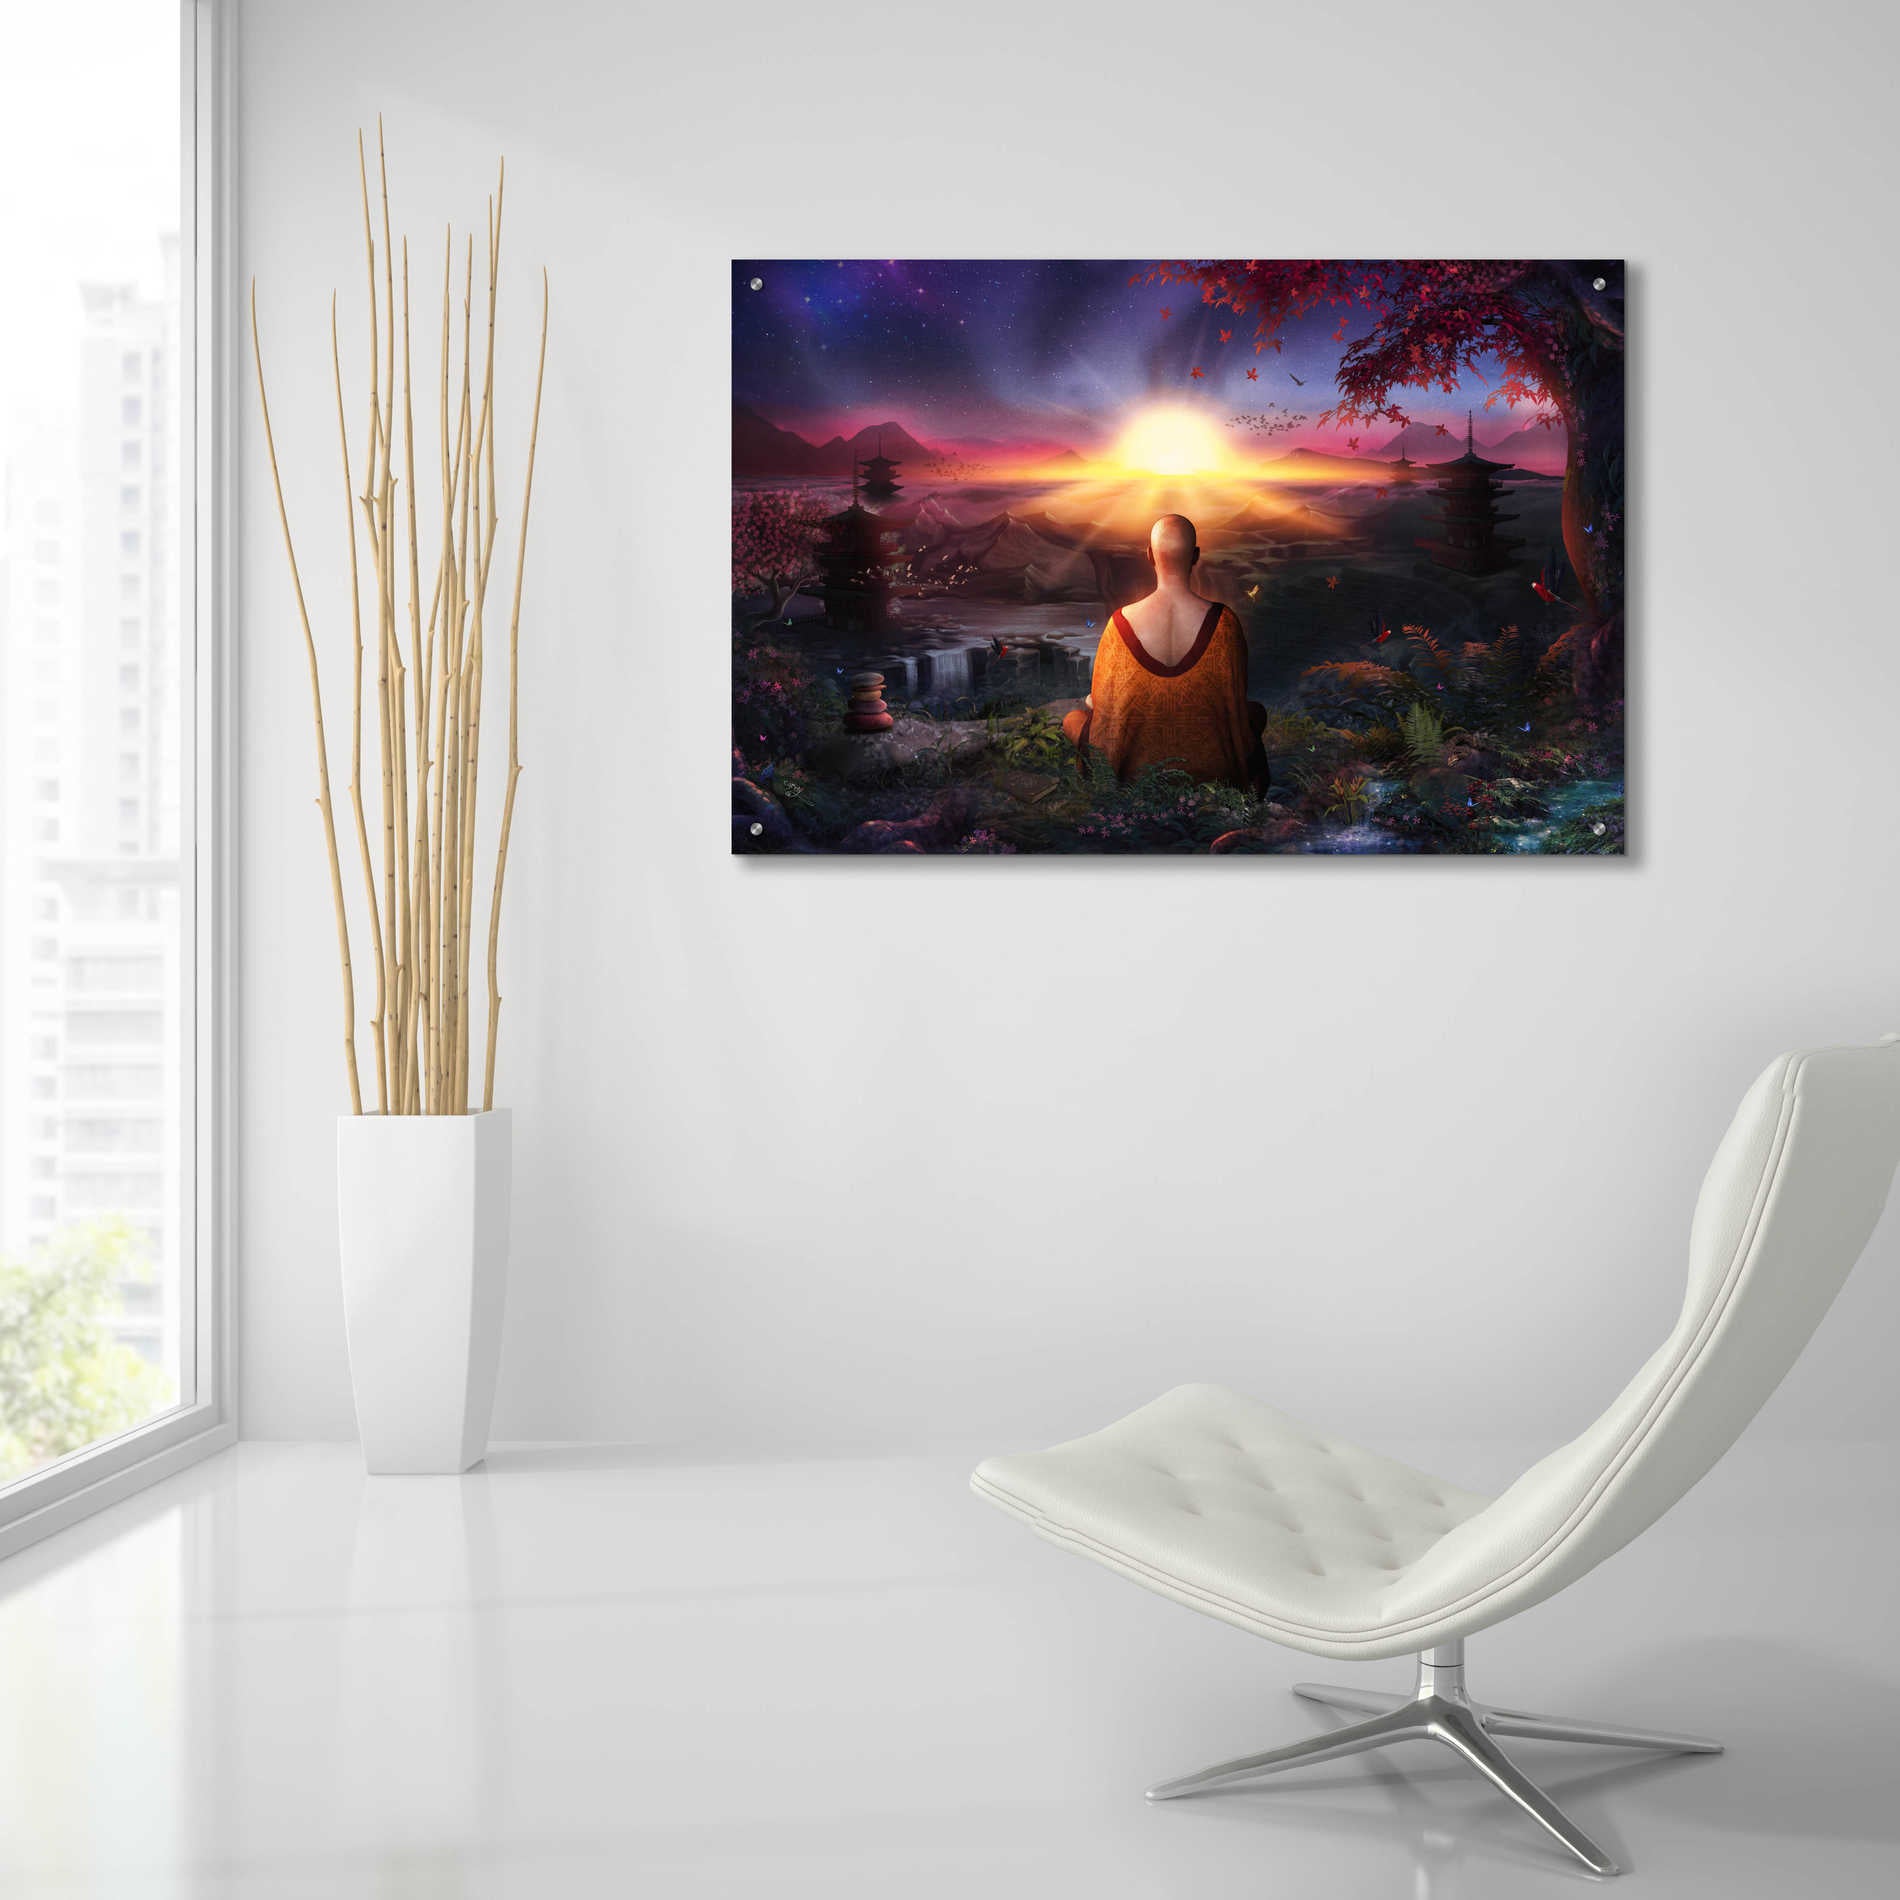 Epic Art 'A Magical Existence' by Cameron Gray Acrylic Glass Wall Art,36x24